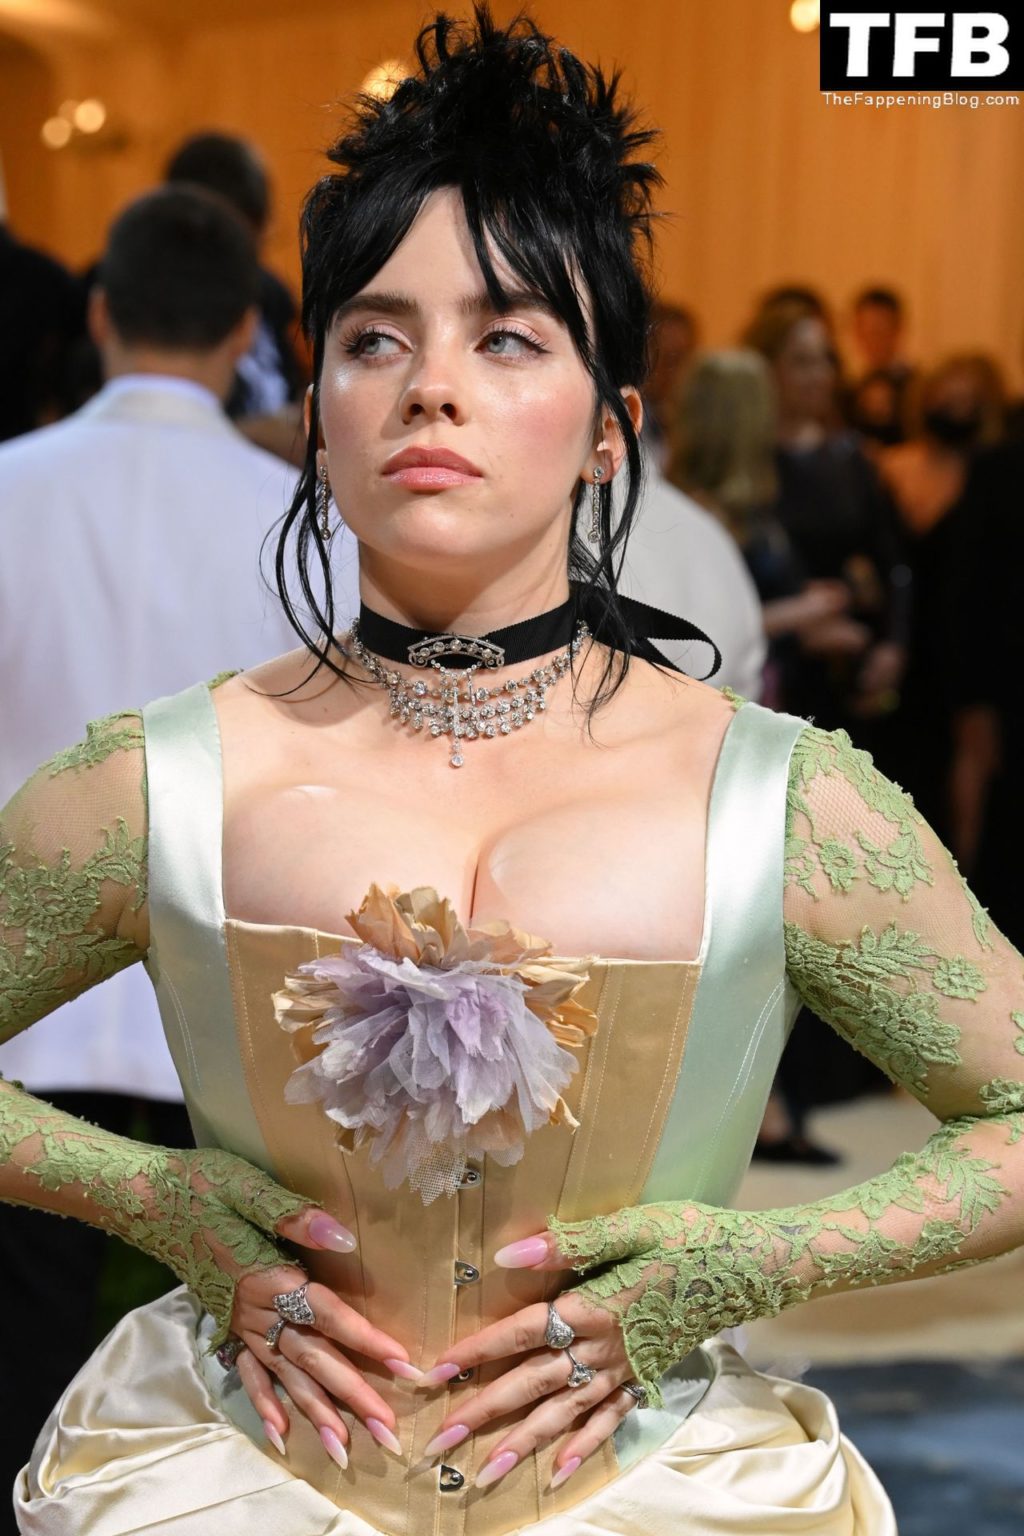 Billie Eilish Sexy The Fappening Blog 130 1024x1536 - Billie Eilish Showcases Nice Cleavage at The 2022 Met Gala in NYC (155 Photos)